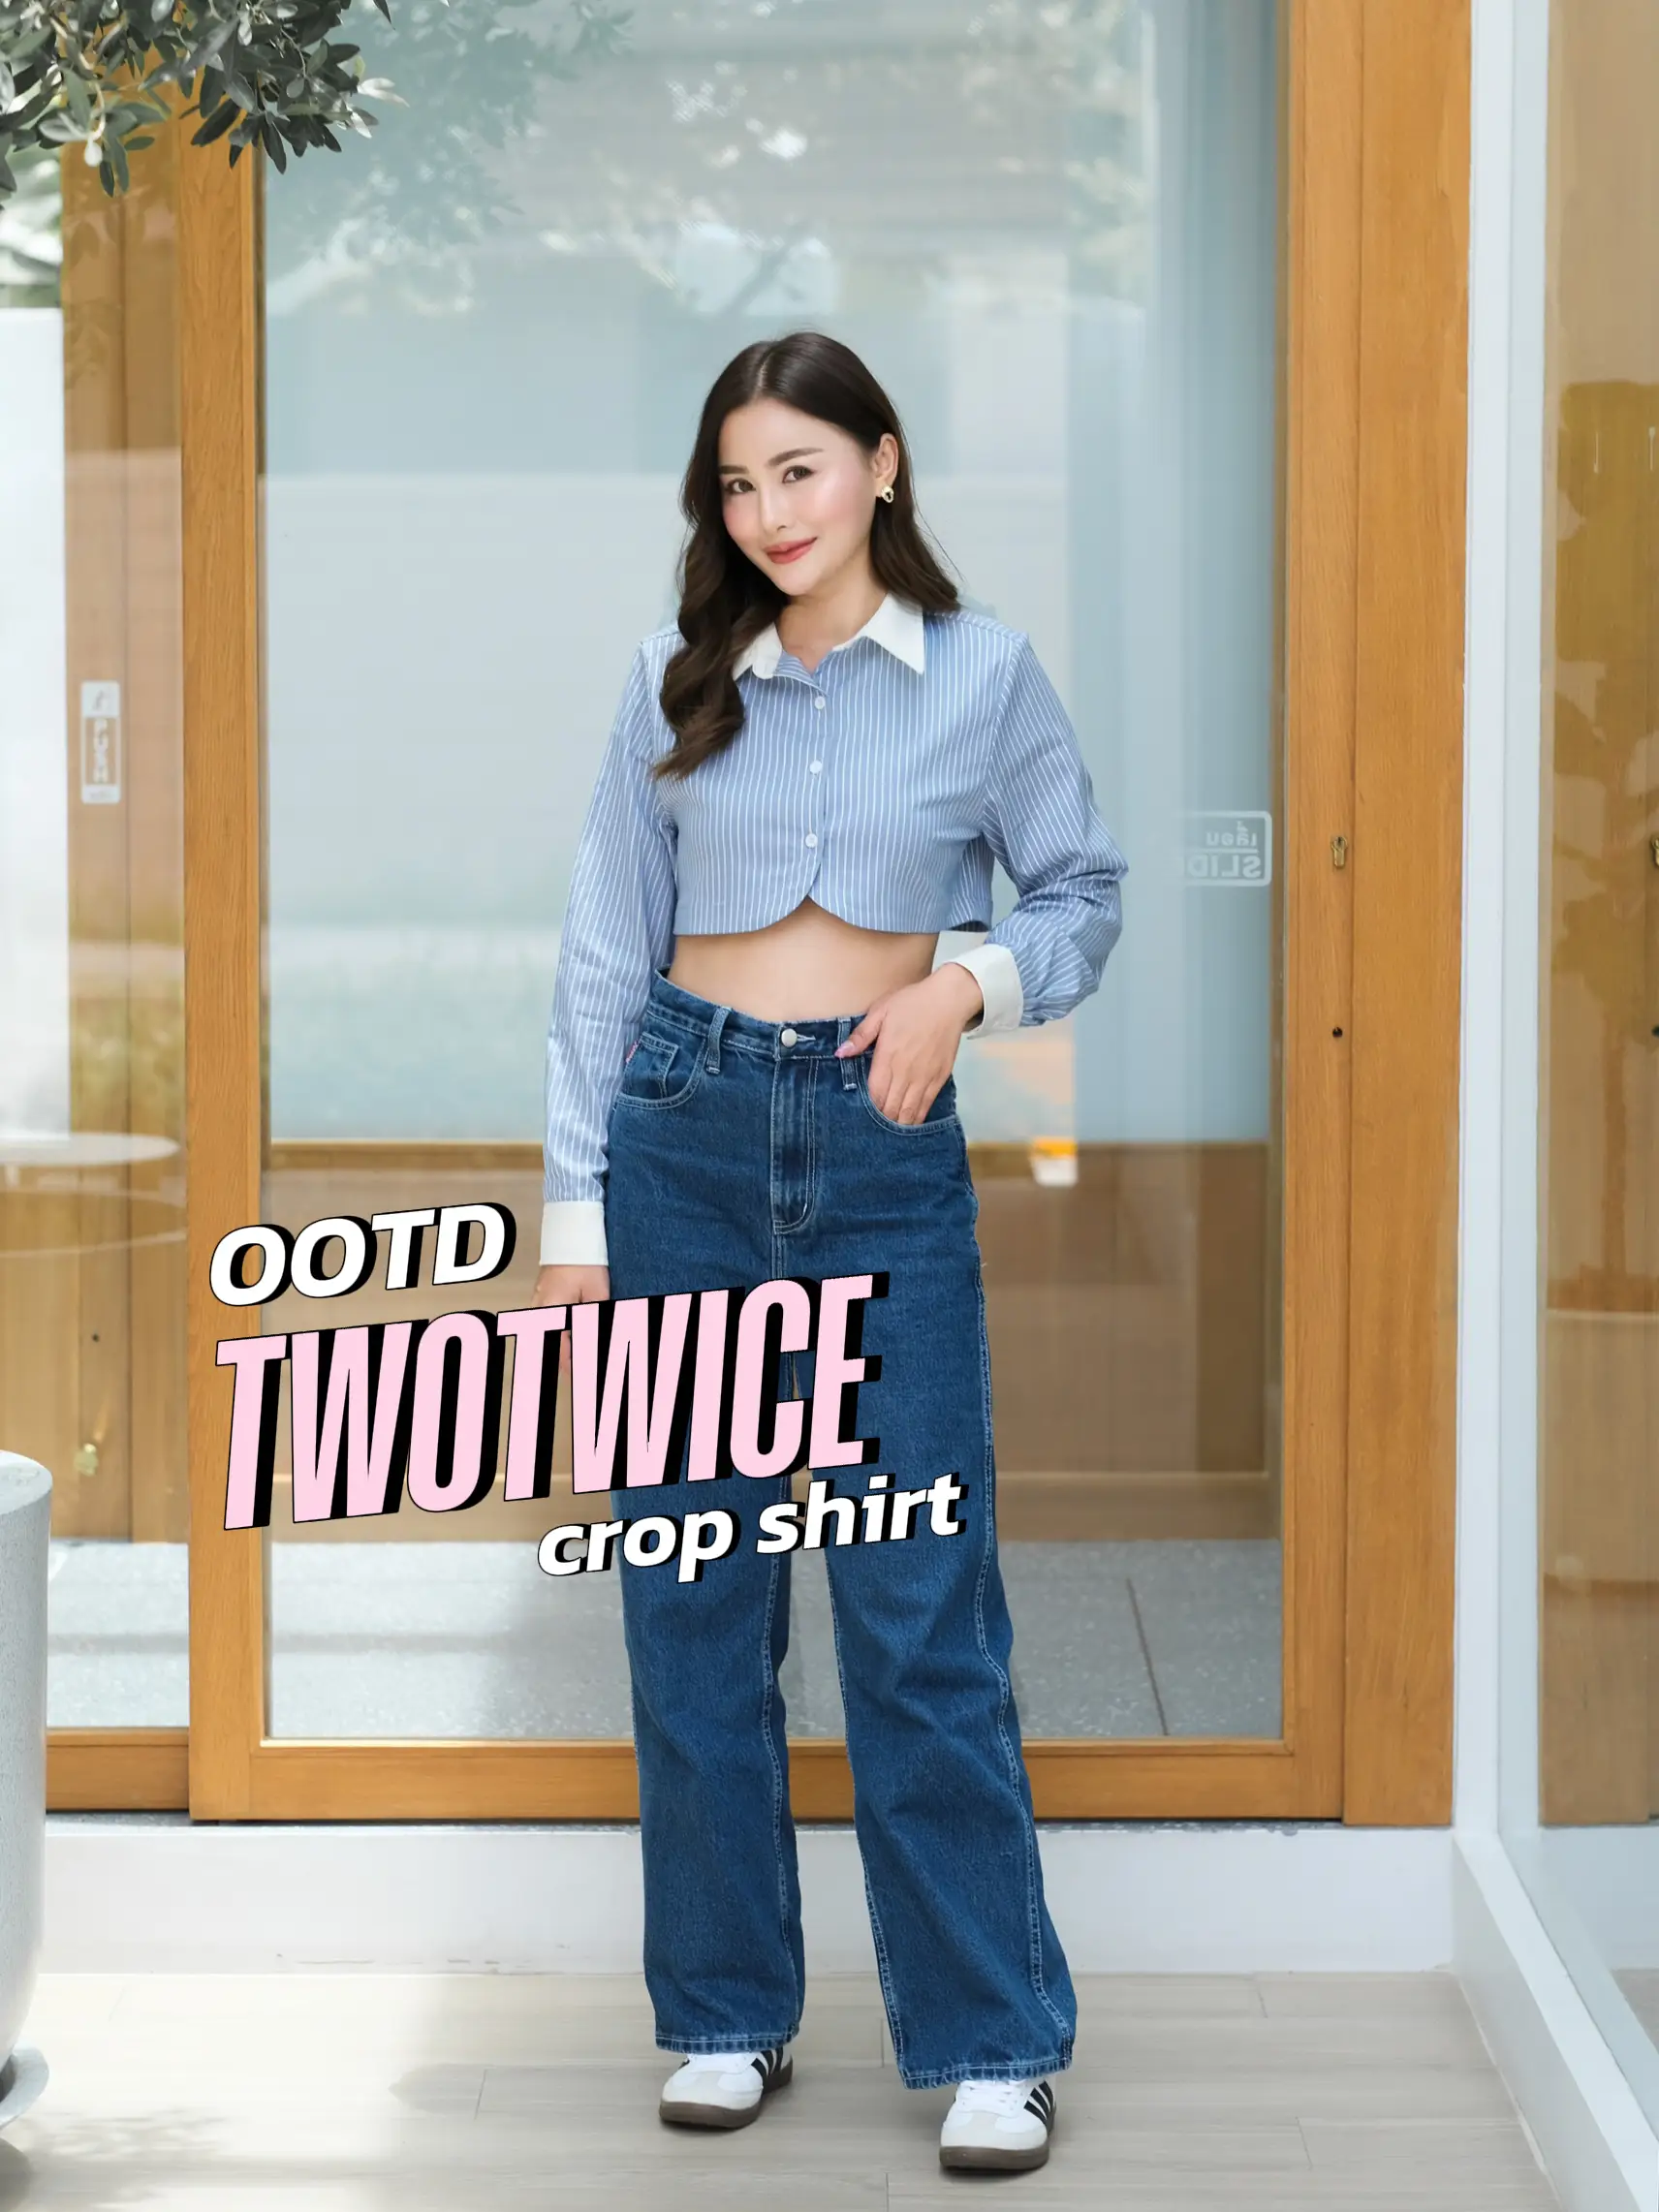 TWOTWICE SHIRT REVIEW 🍋, Gallery posted by peeraya